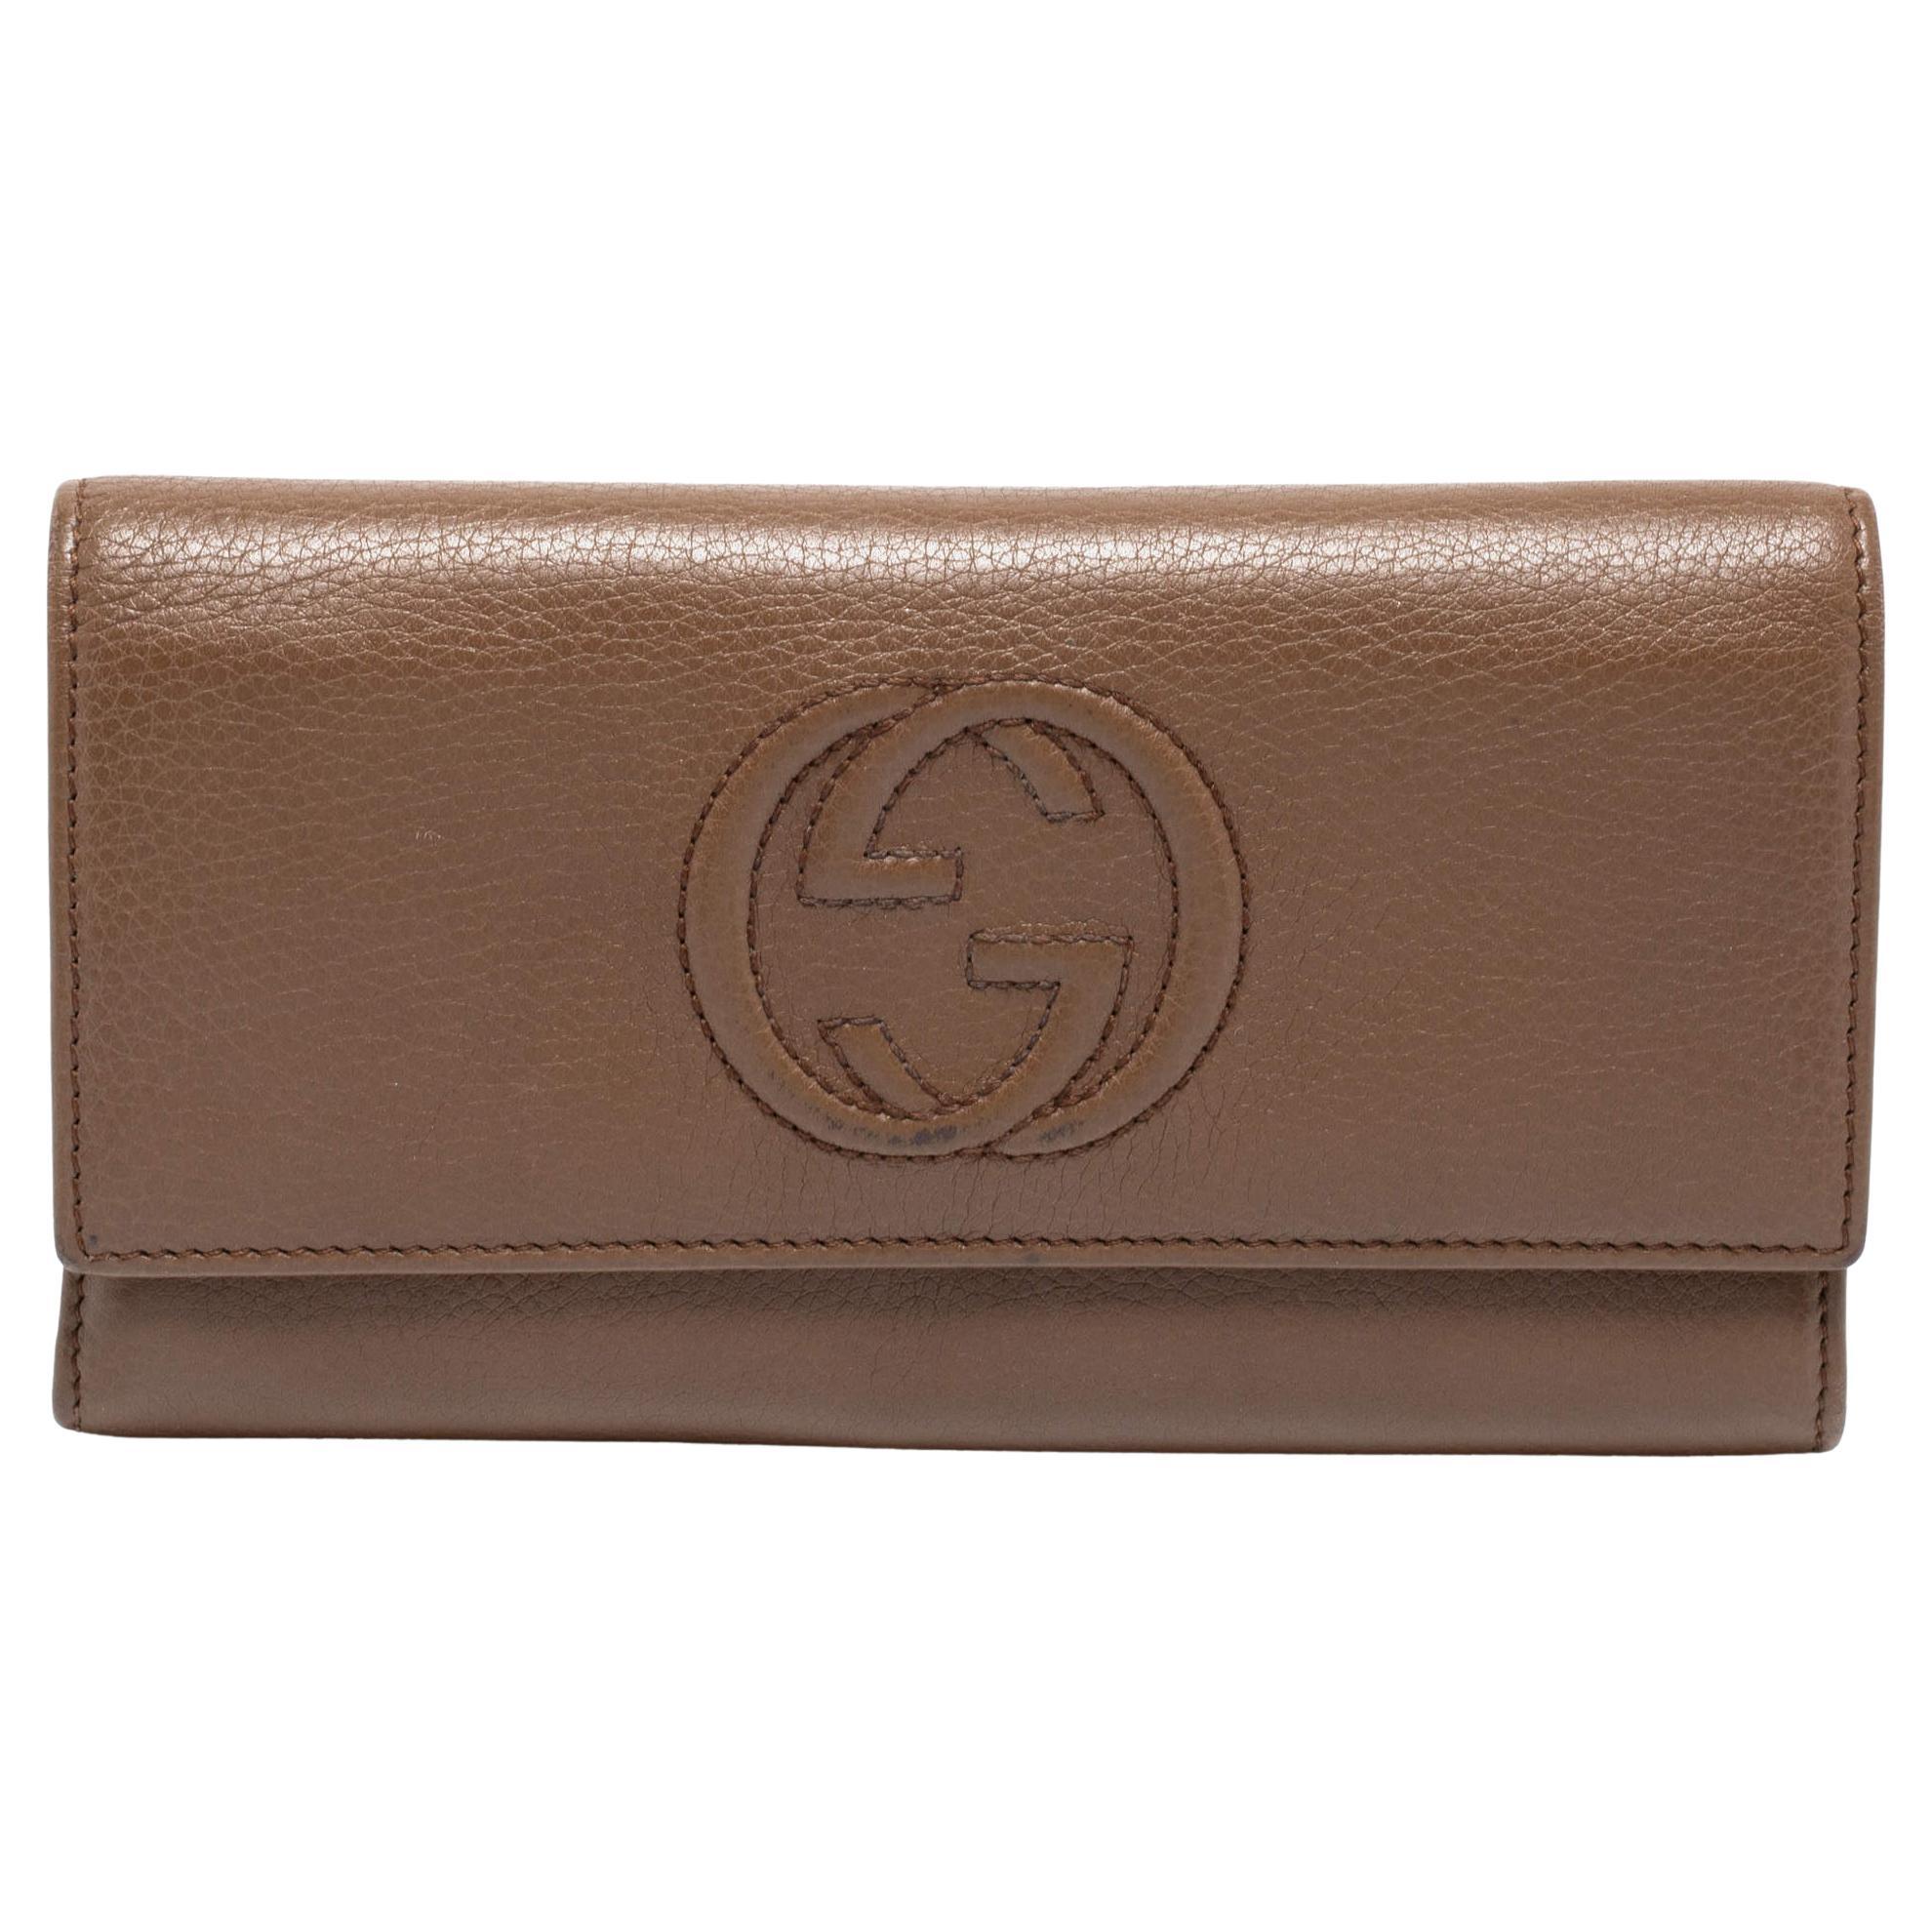 Gucci Brown Leather Soho Flap Continental Wallet